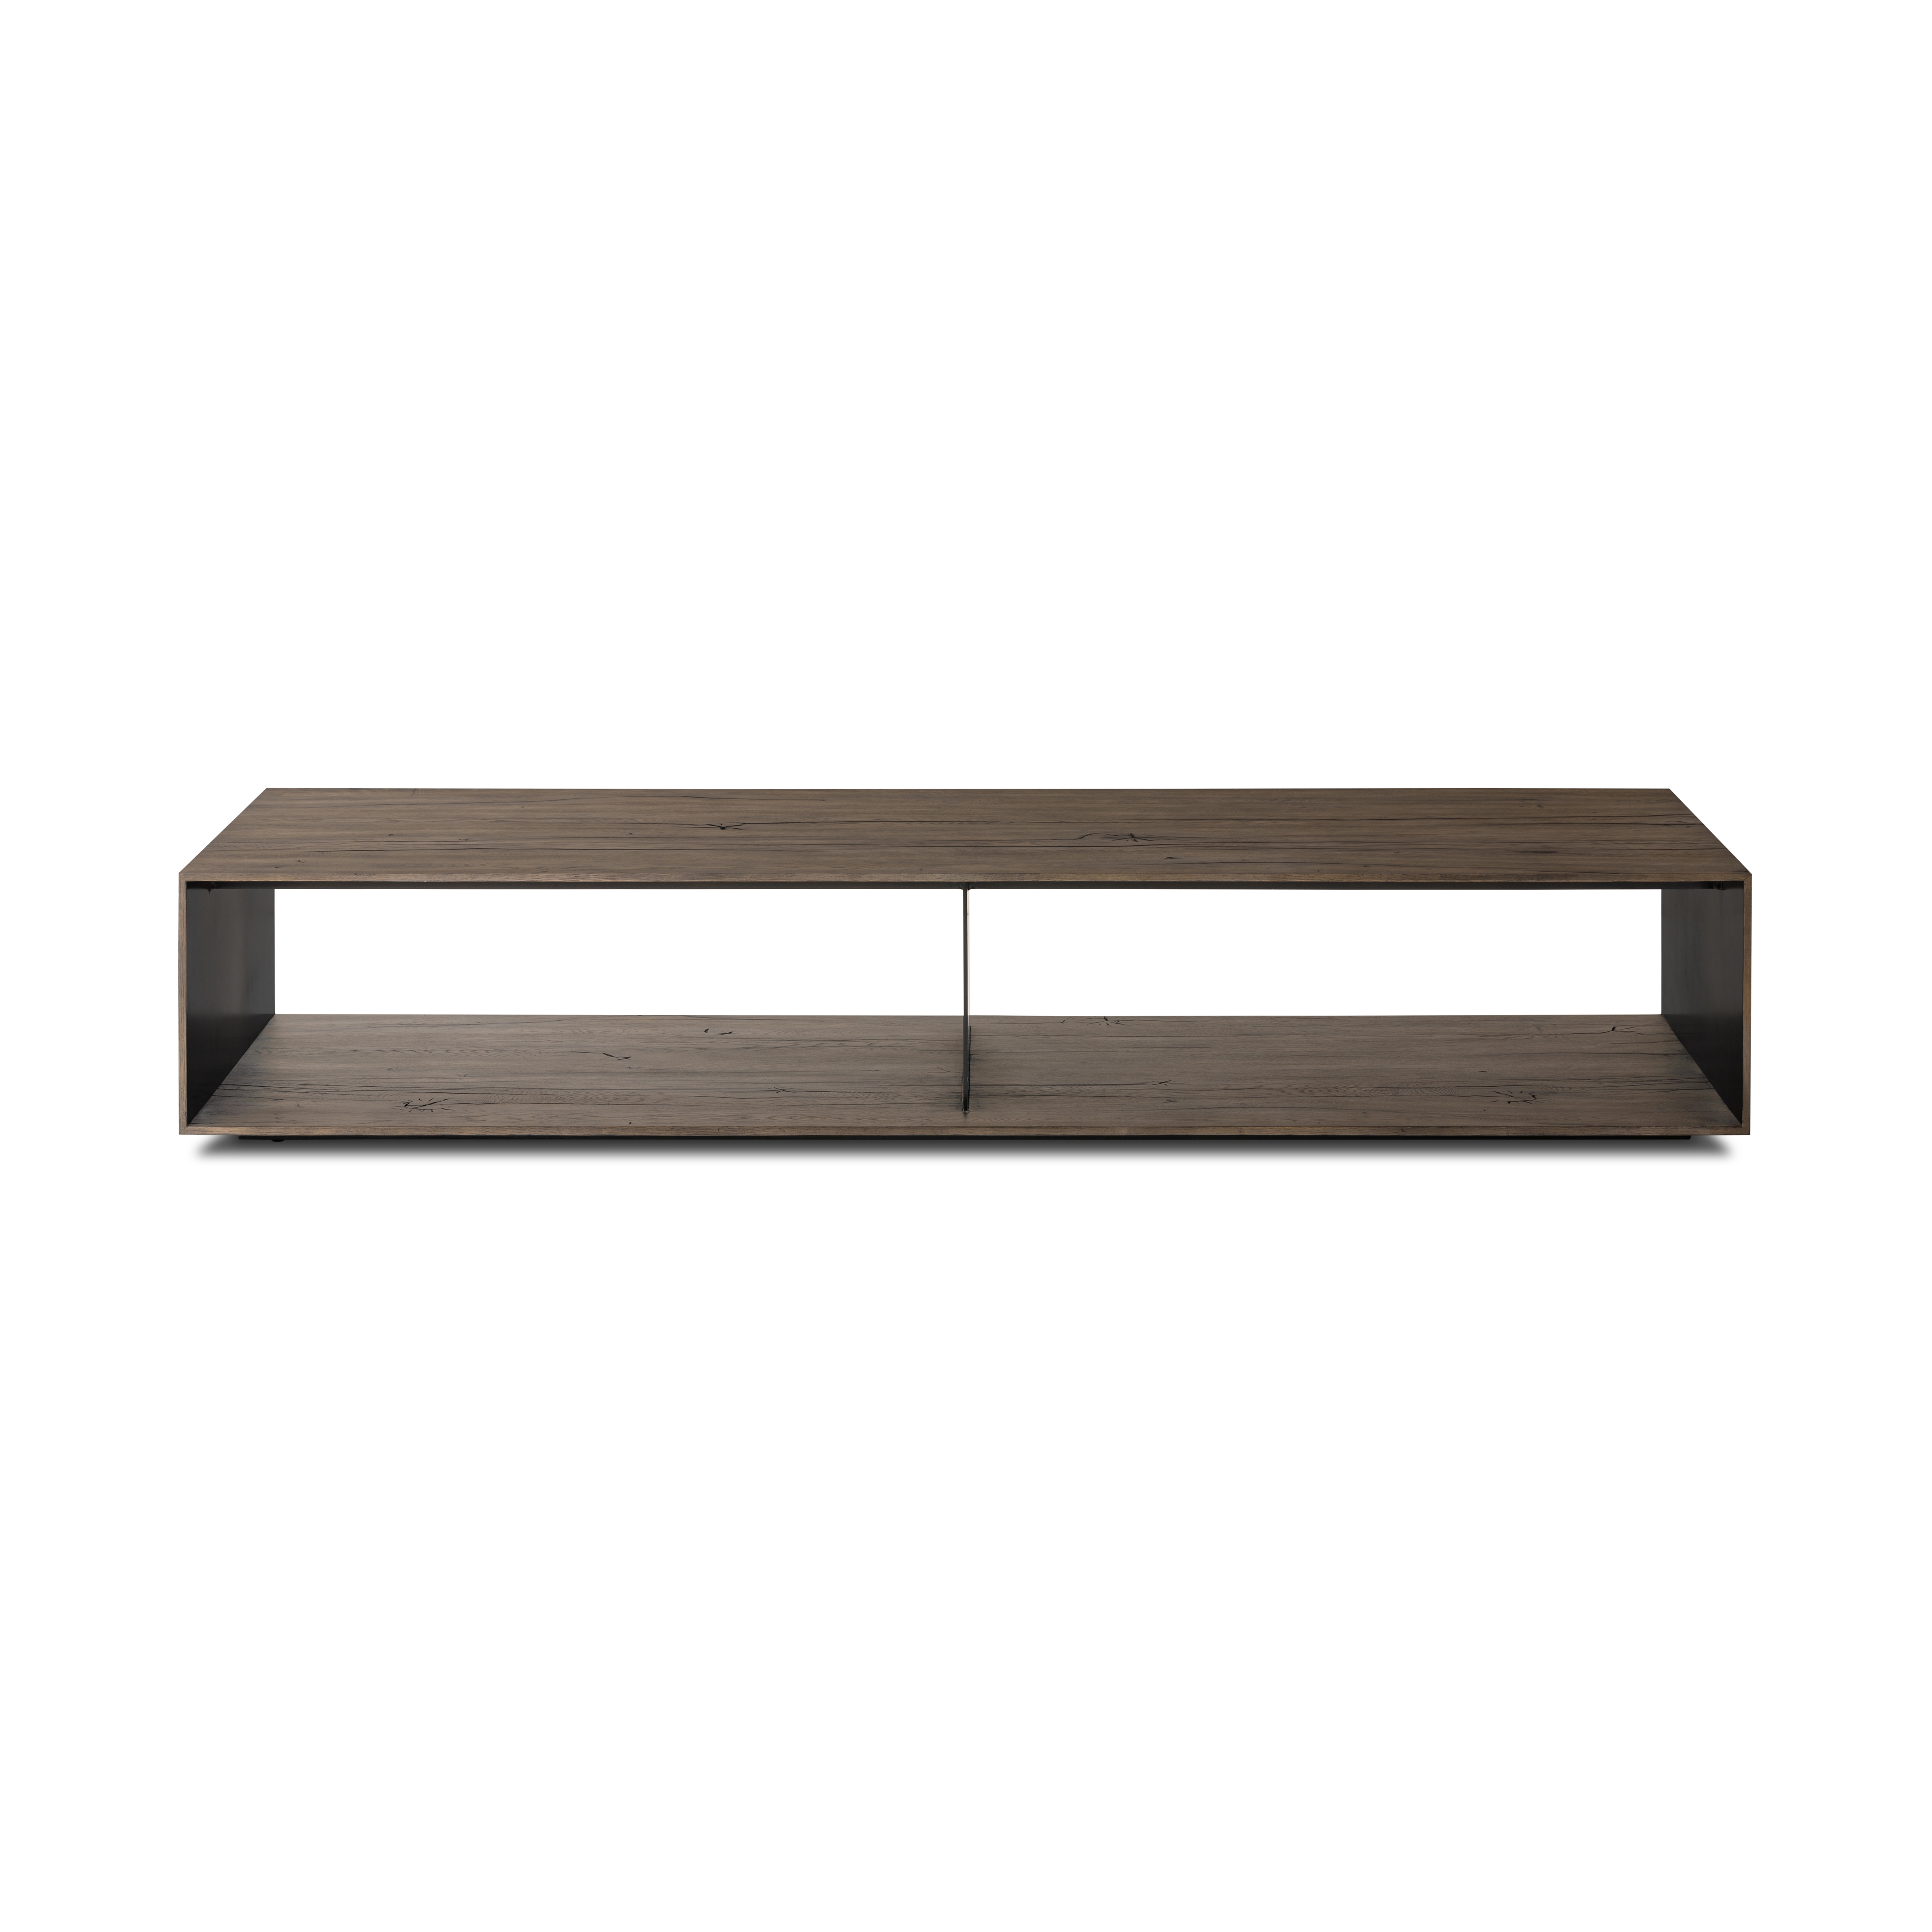 Odell Coffee Table-Grey Rclmd French Oak - Image 3